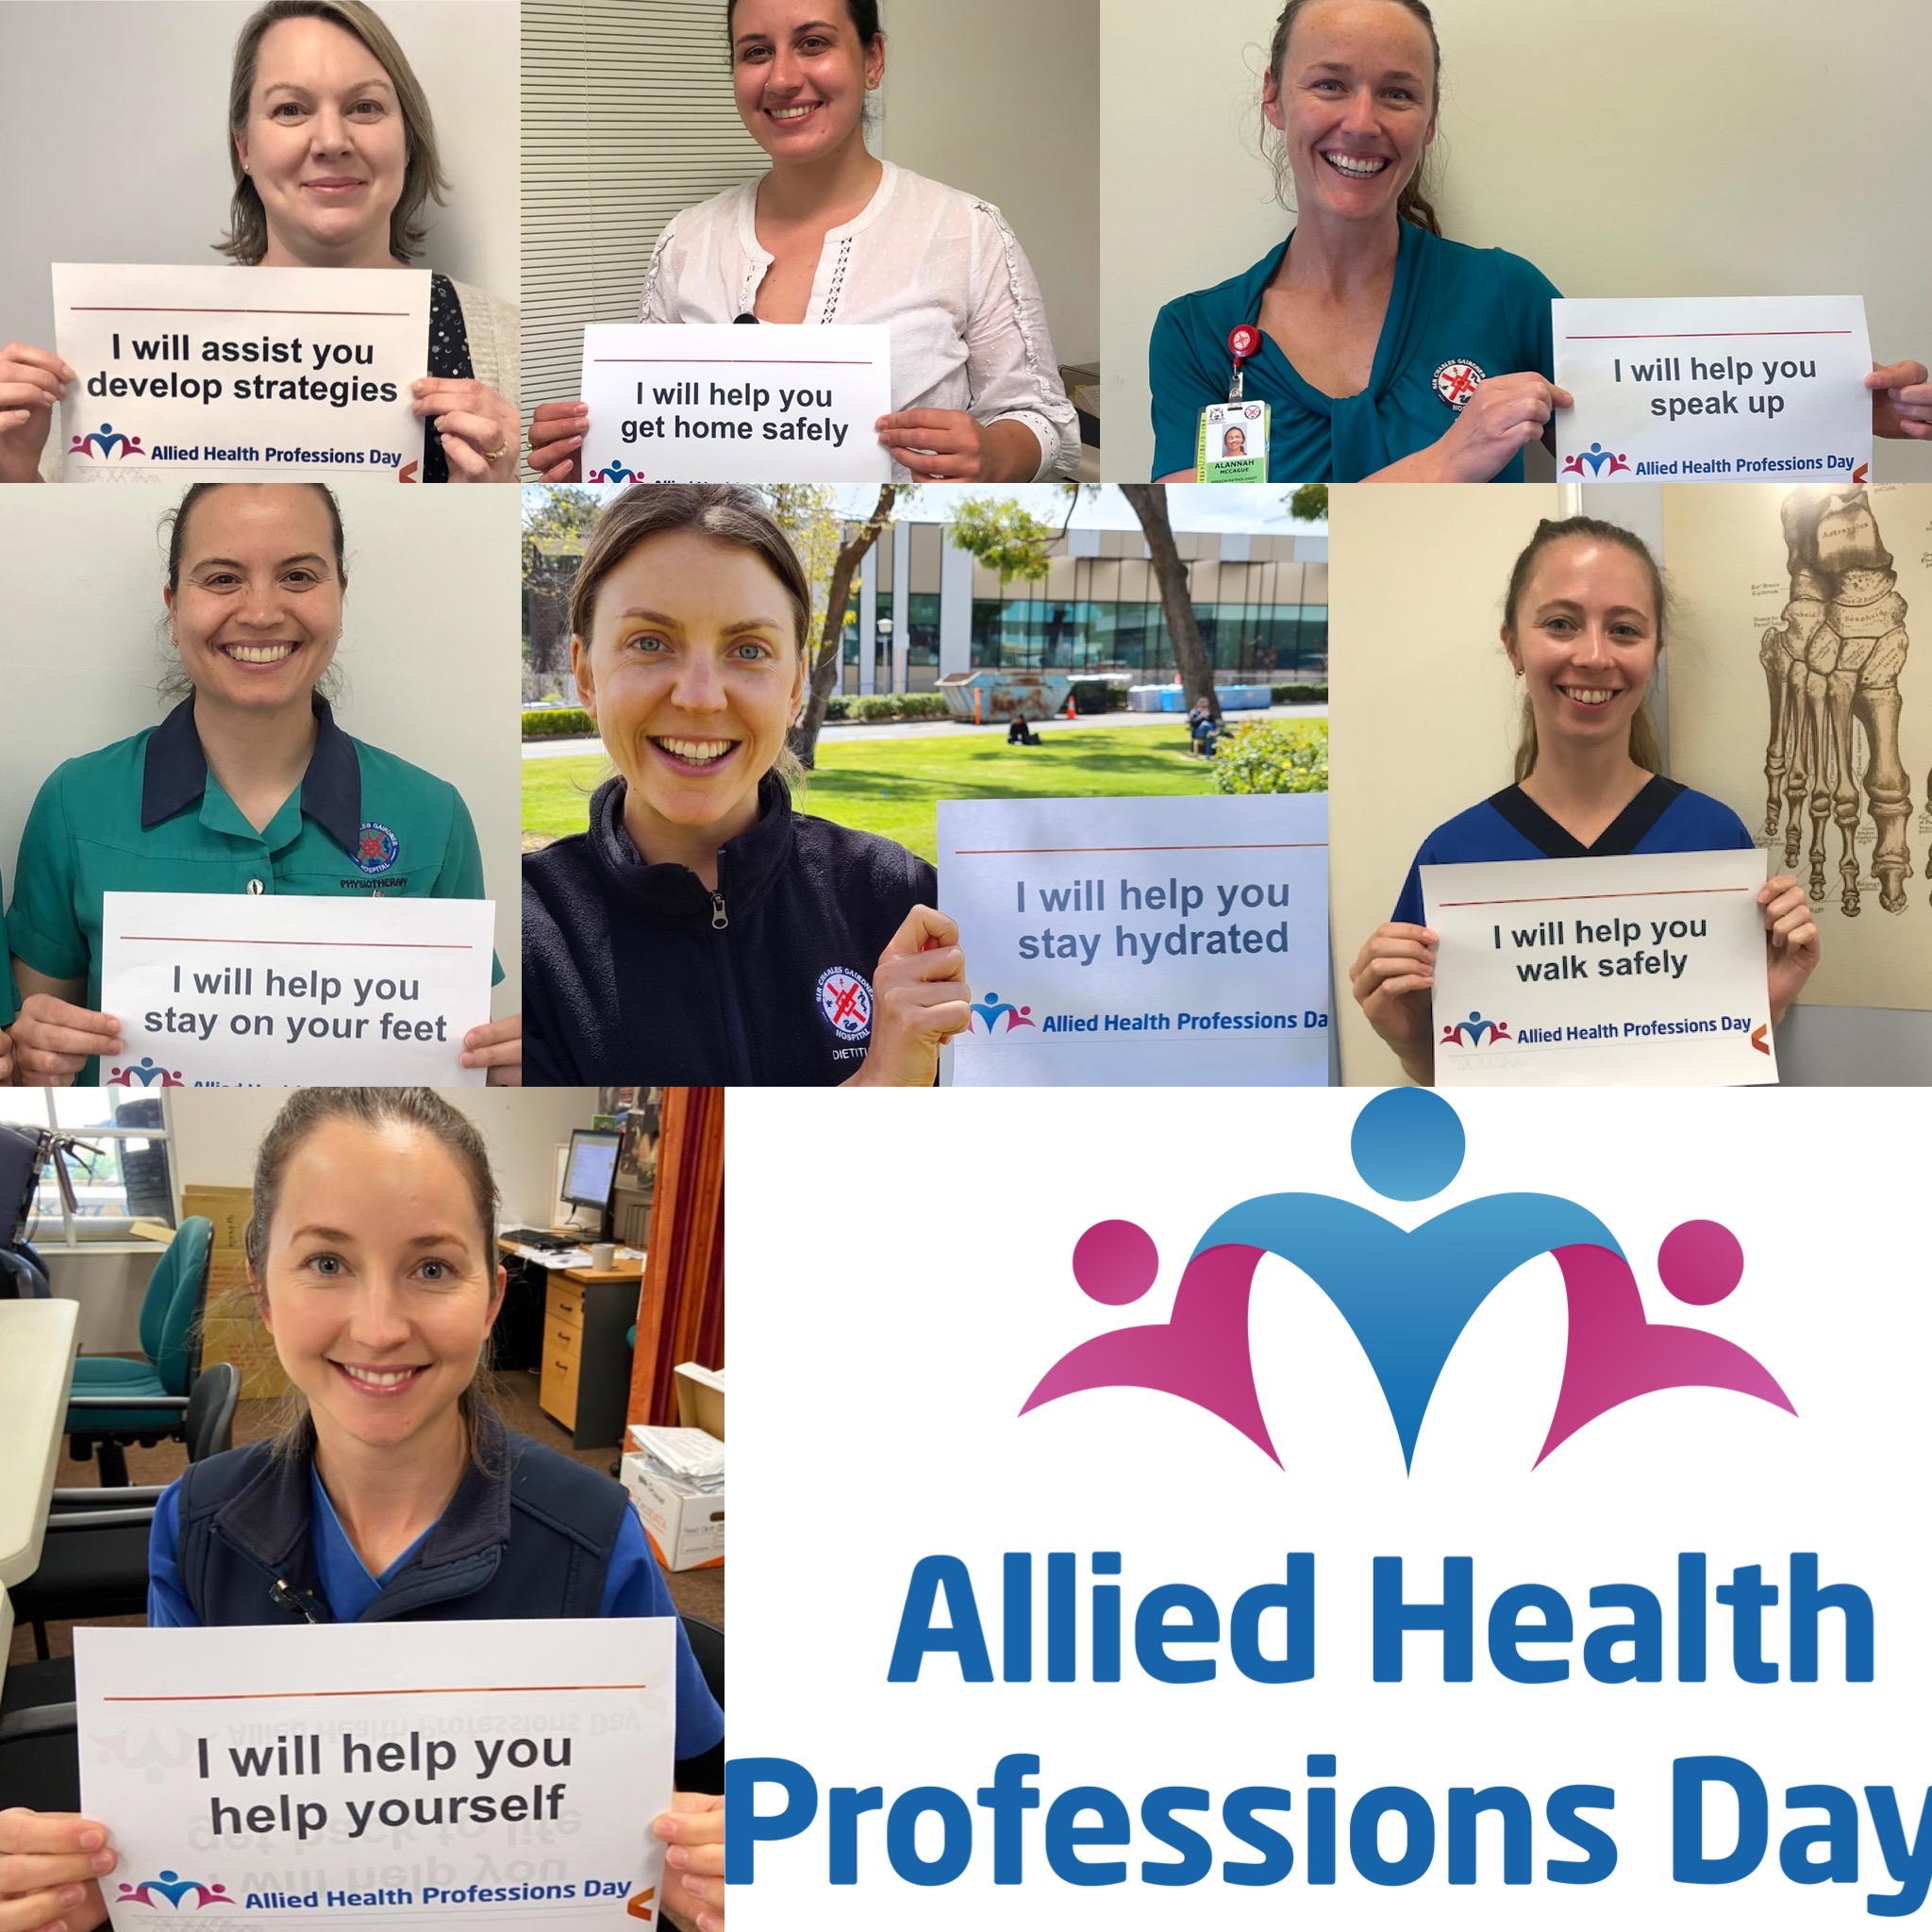 Allied Health Professionals Day